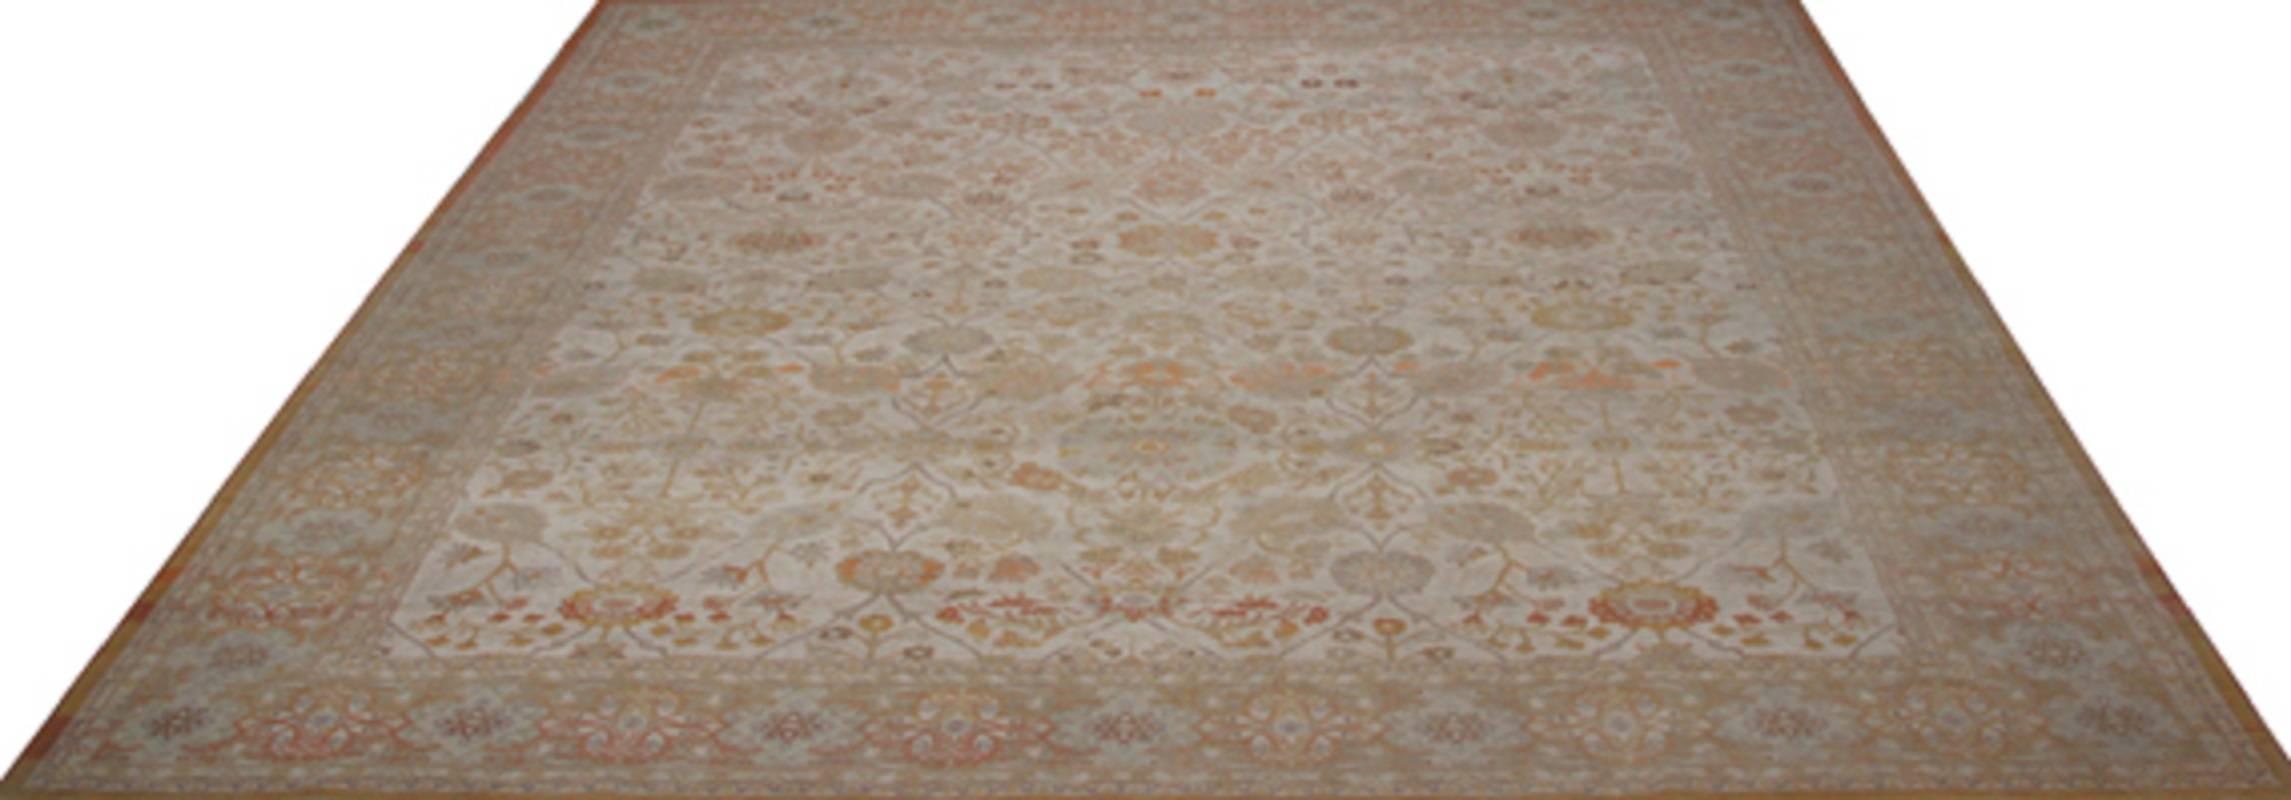 Egyptian Hand Woven Ivory Persian Tabriz Rug Recreation - FREE SHIPPING For Sale